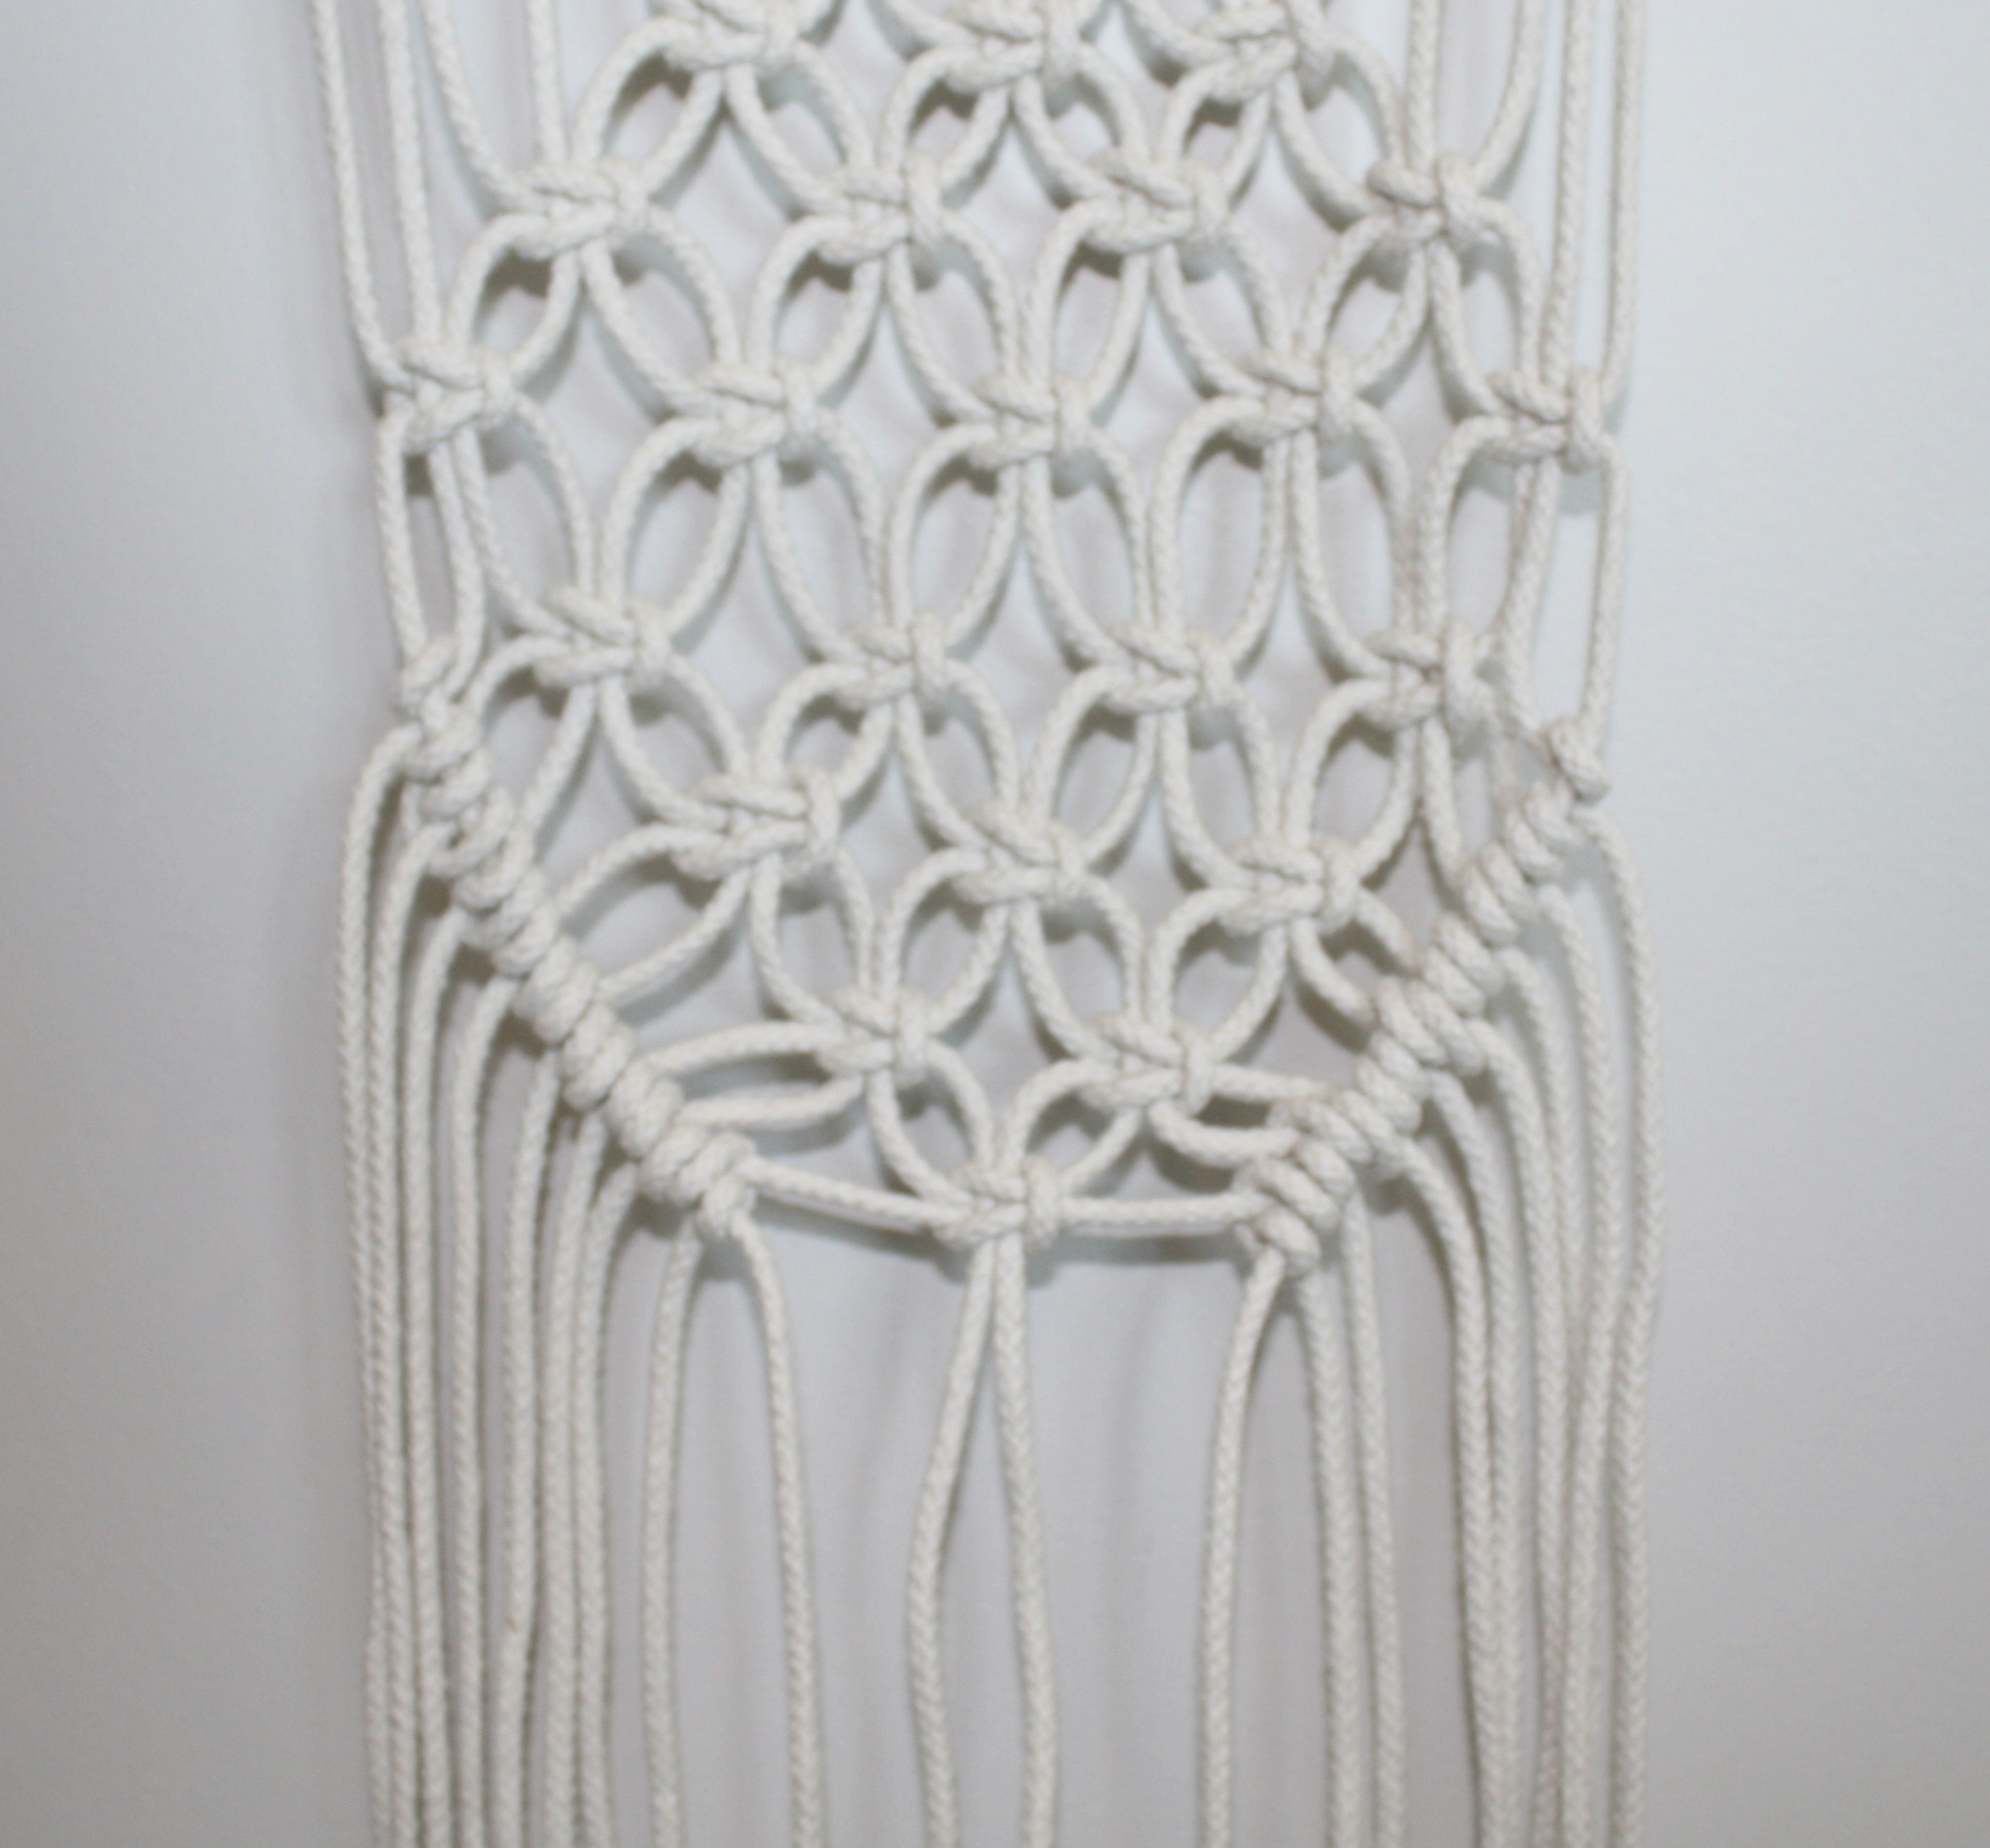 black and white macrame wall hanging - My French Twist